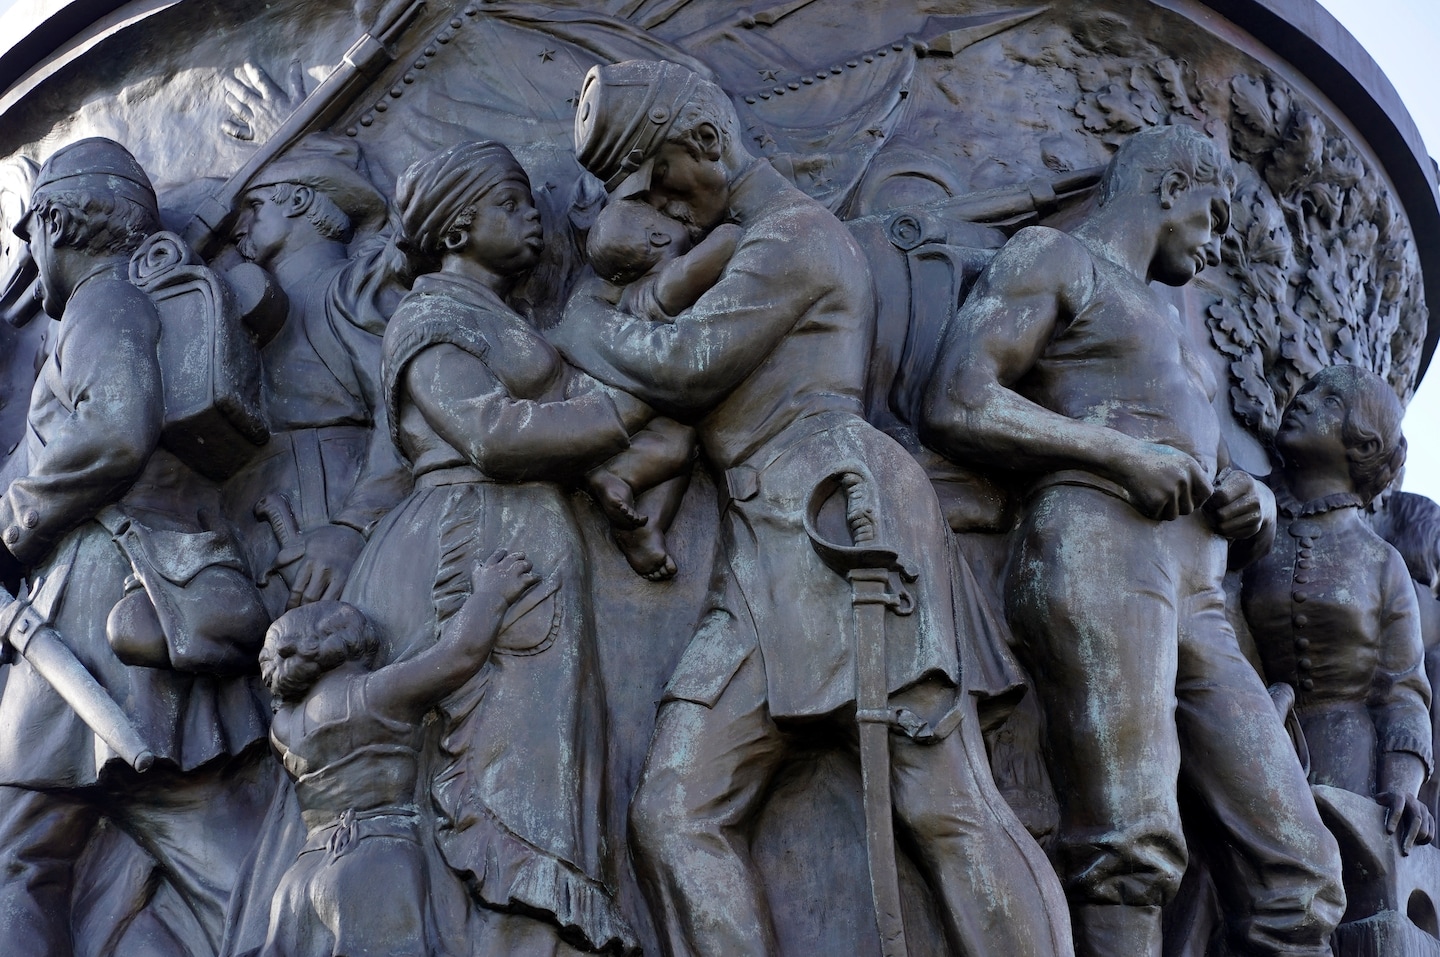 Confederate Memorial at Arlington will be removed despite GOP opposition